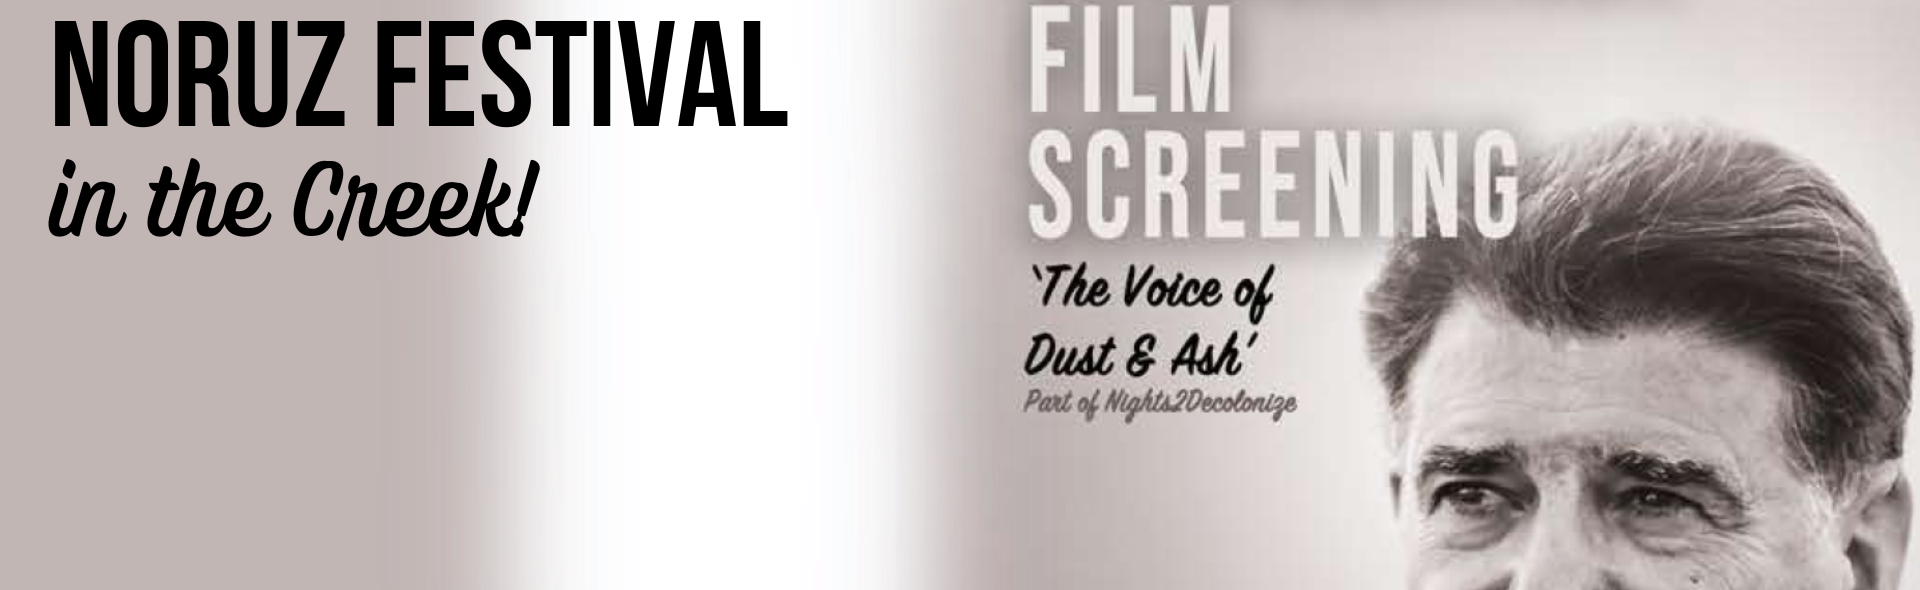 Documentary Film Screening: “The Voice of Dust and Ash”